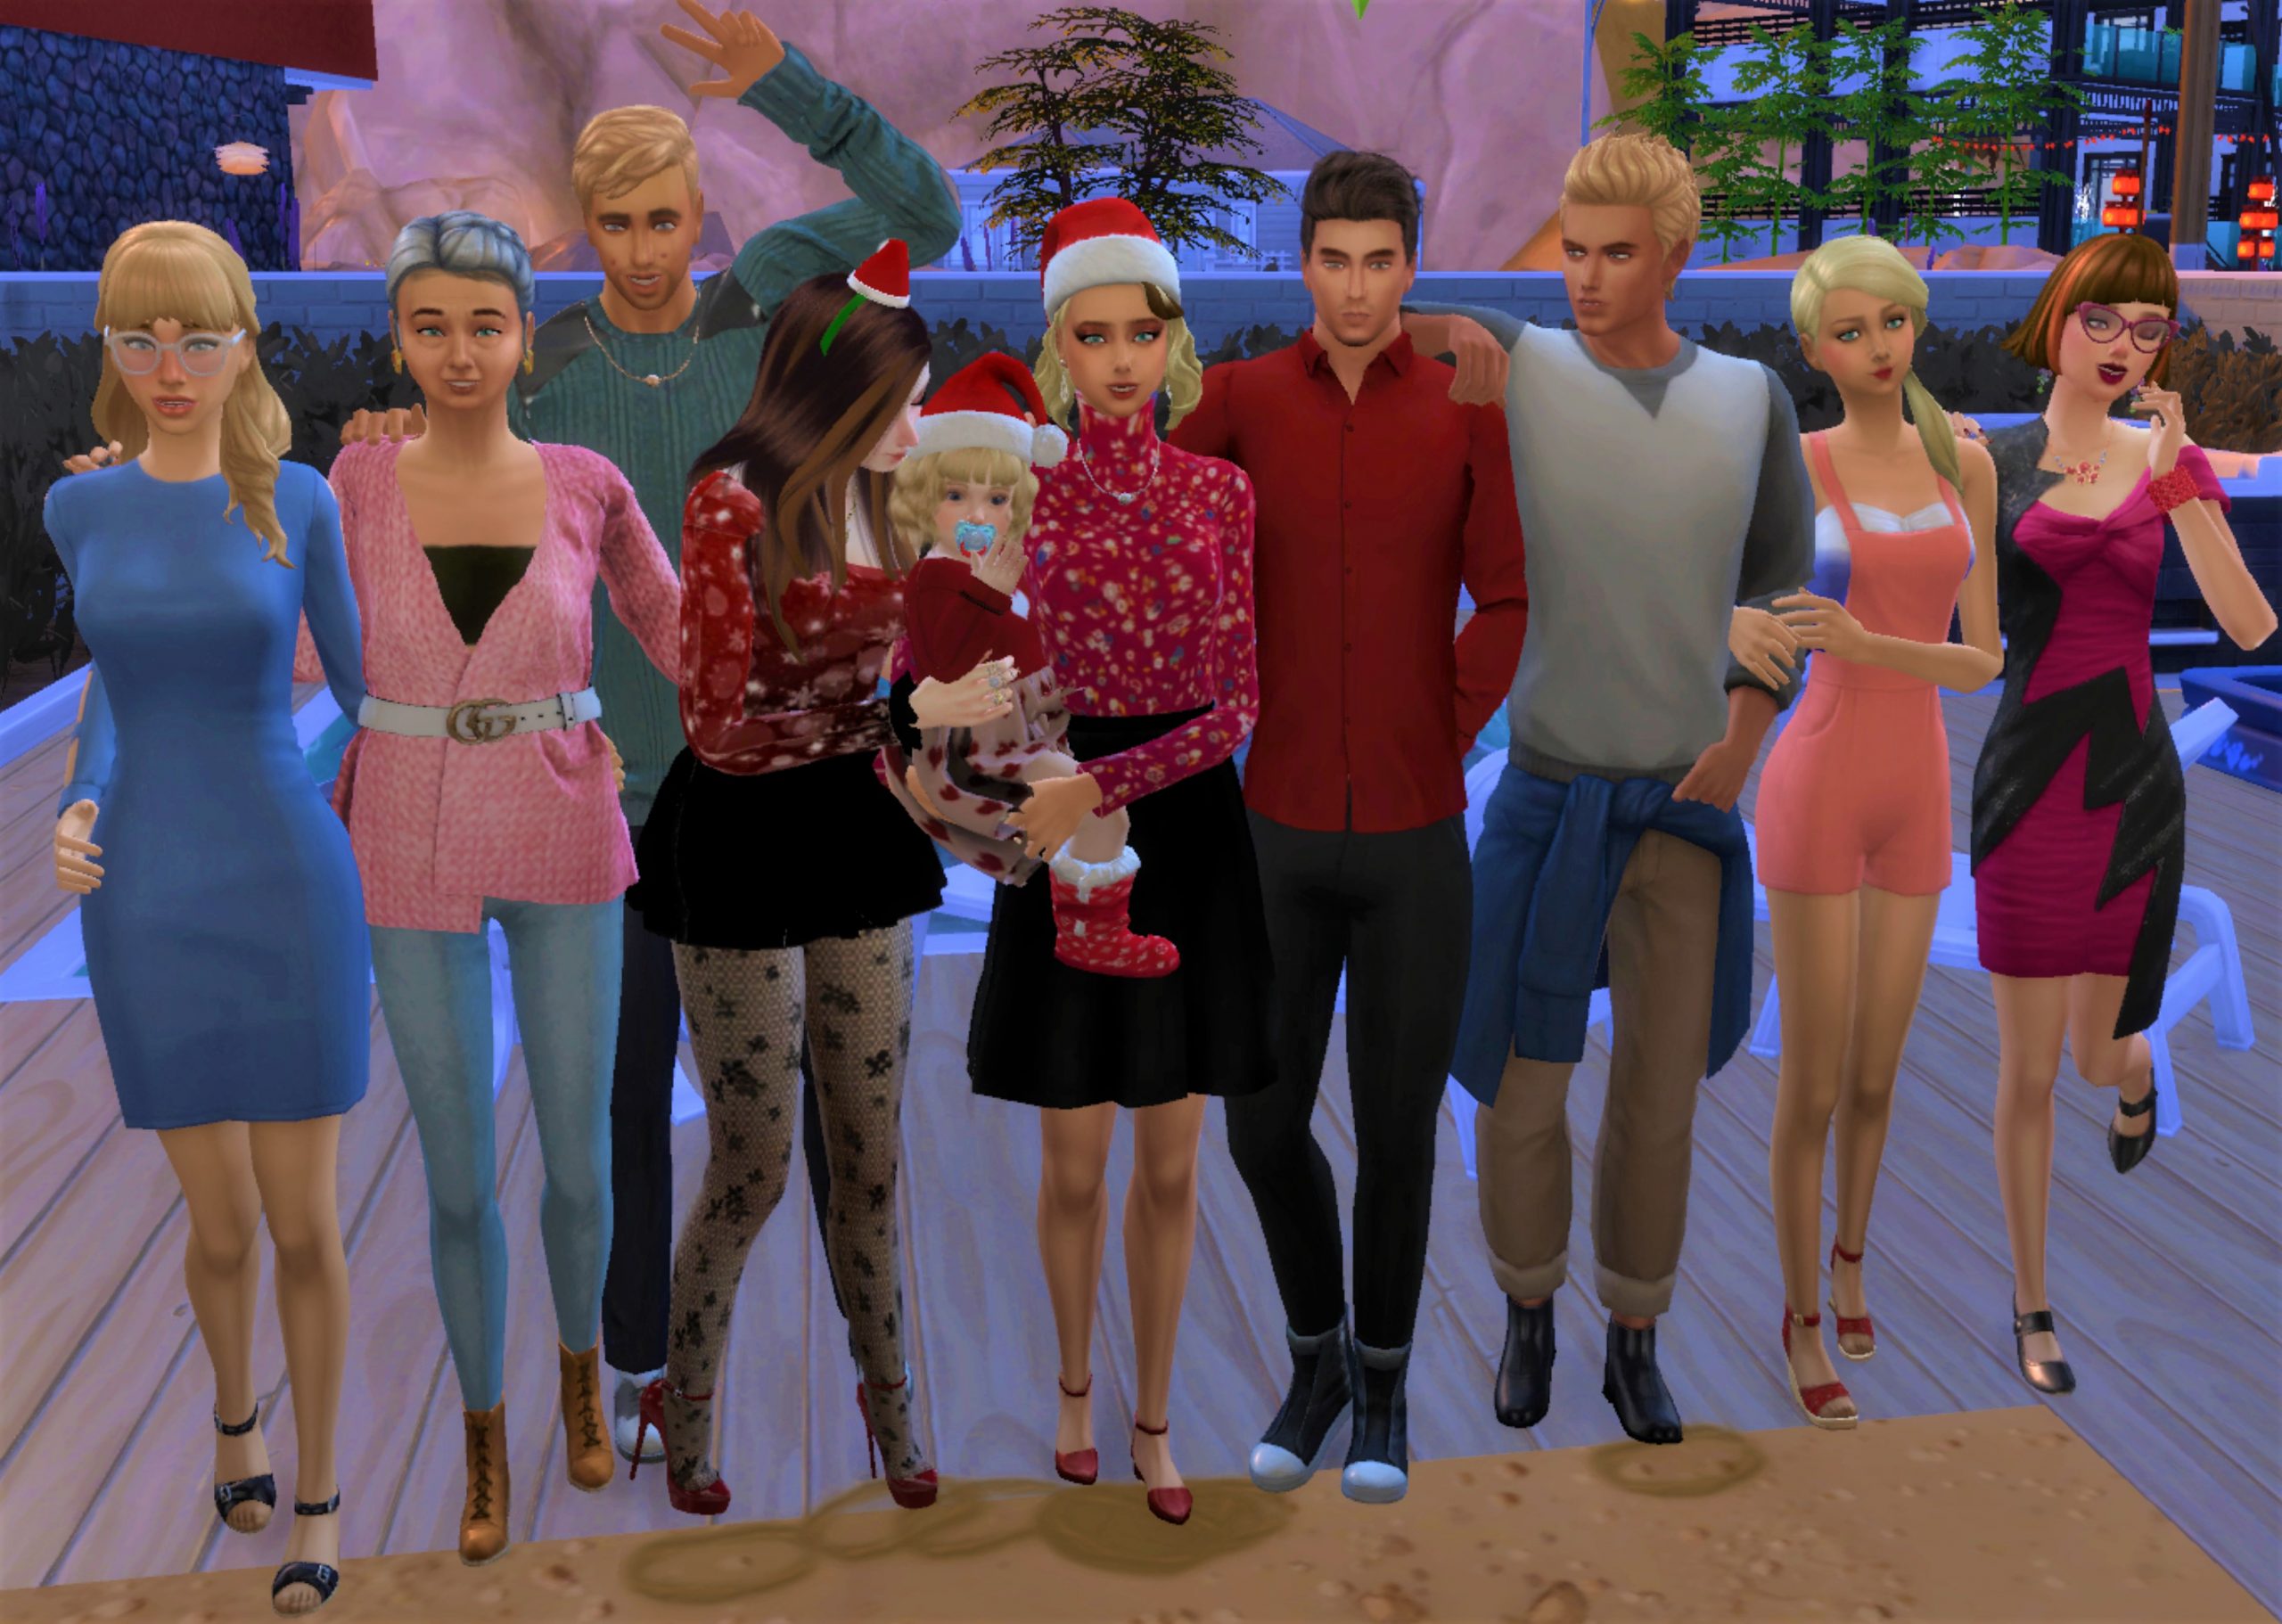 Got bored of the usual gameplay so put a twist on a classic. Presenting the  Vampire Bachelor challenge! 7 sims compete to win the favour of Grandmaster  Vampire Alarcon...in the form of